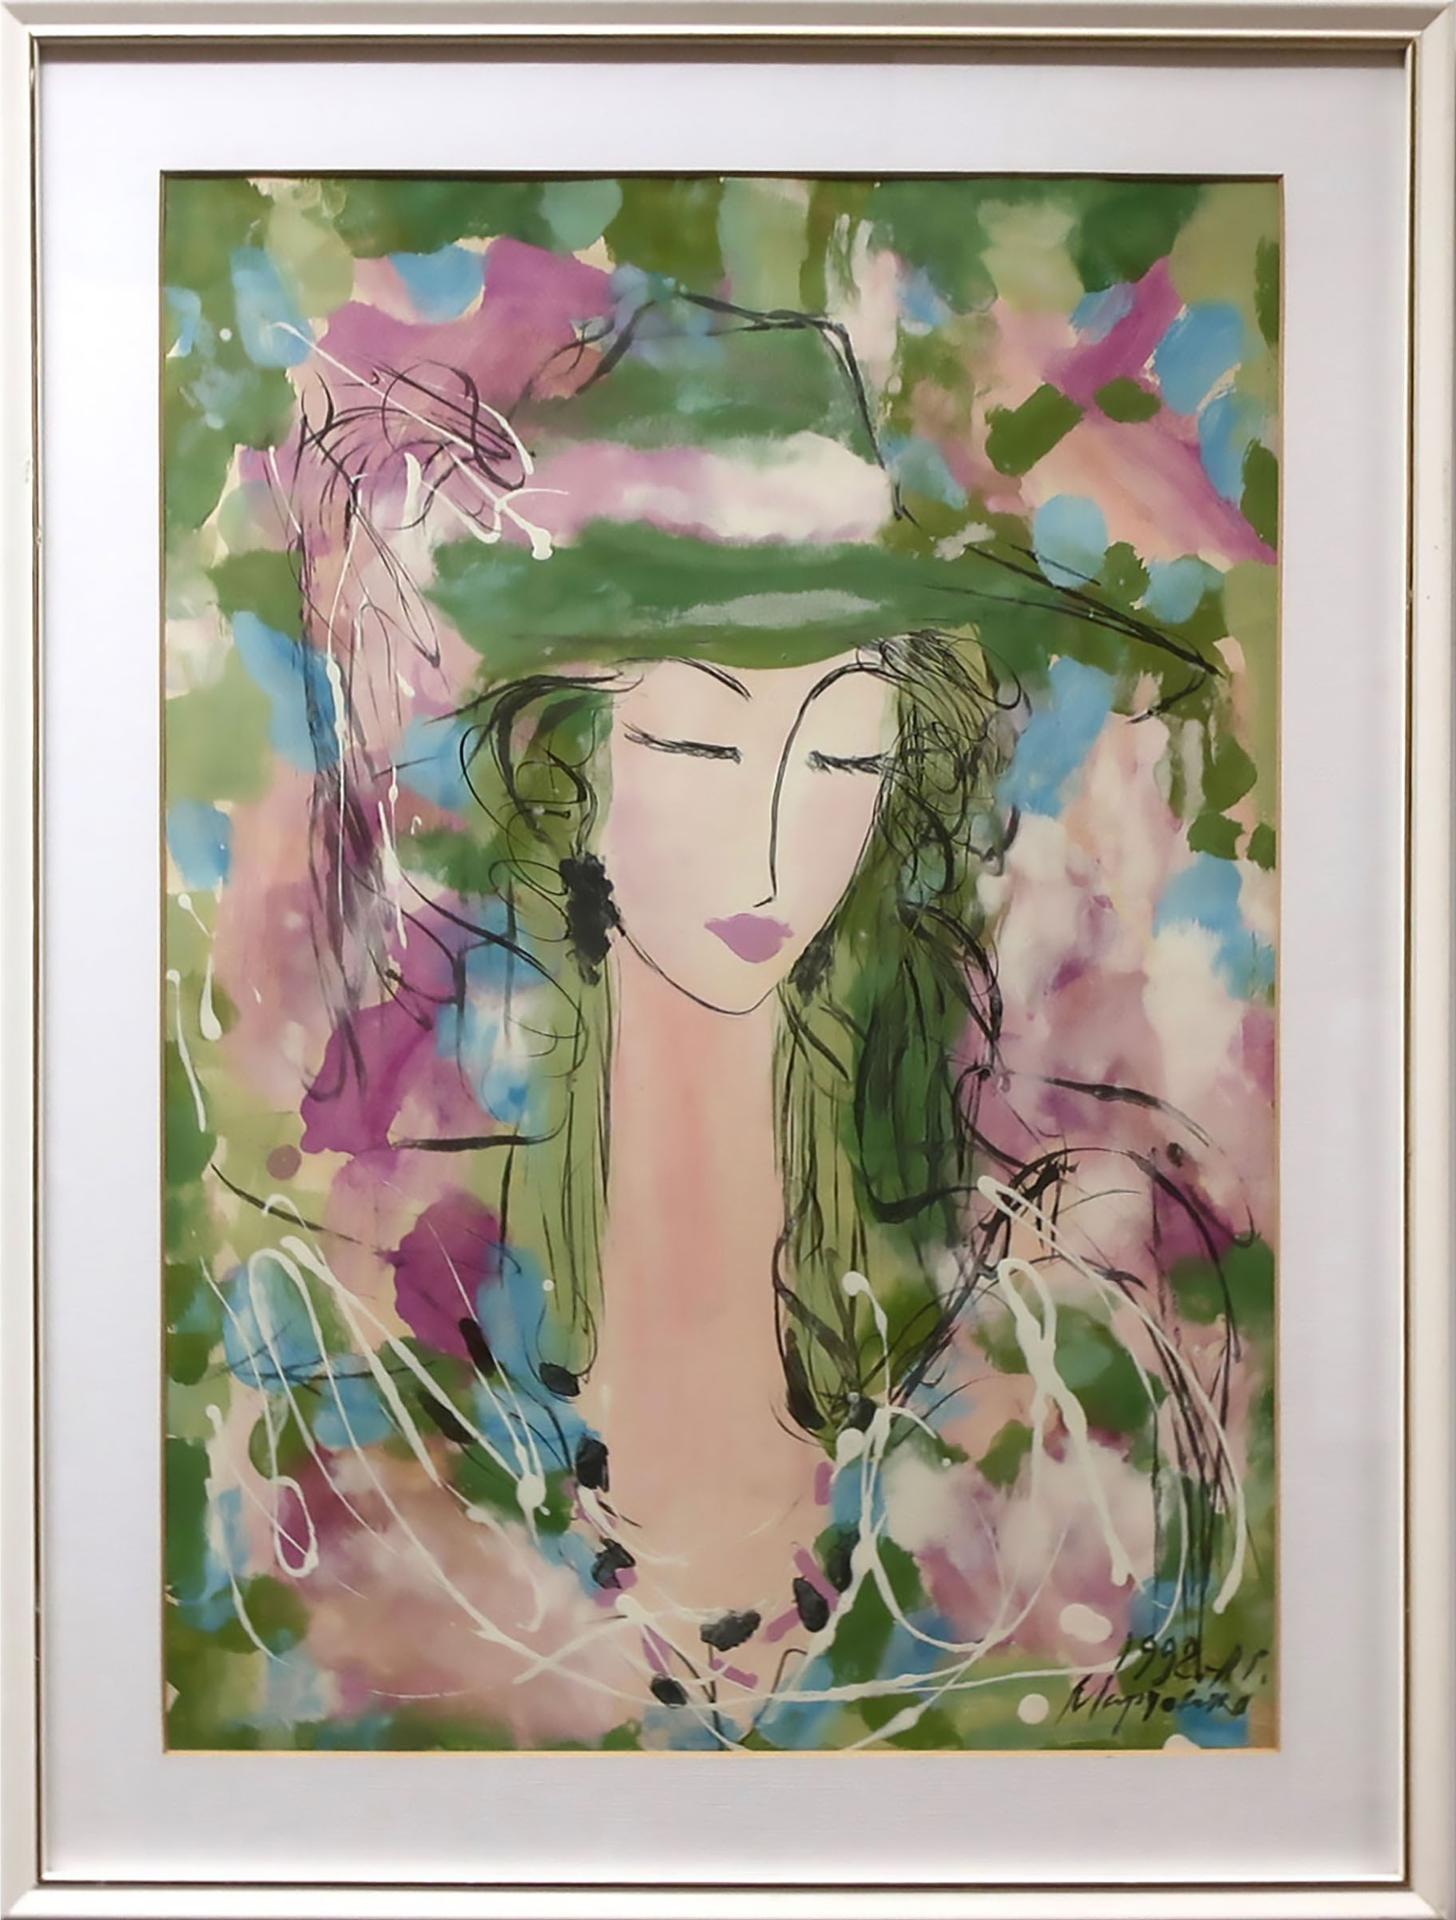 Vitali Marchenko - Untitled (Lady With Green Hat)